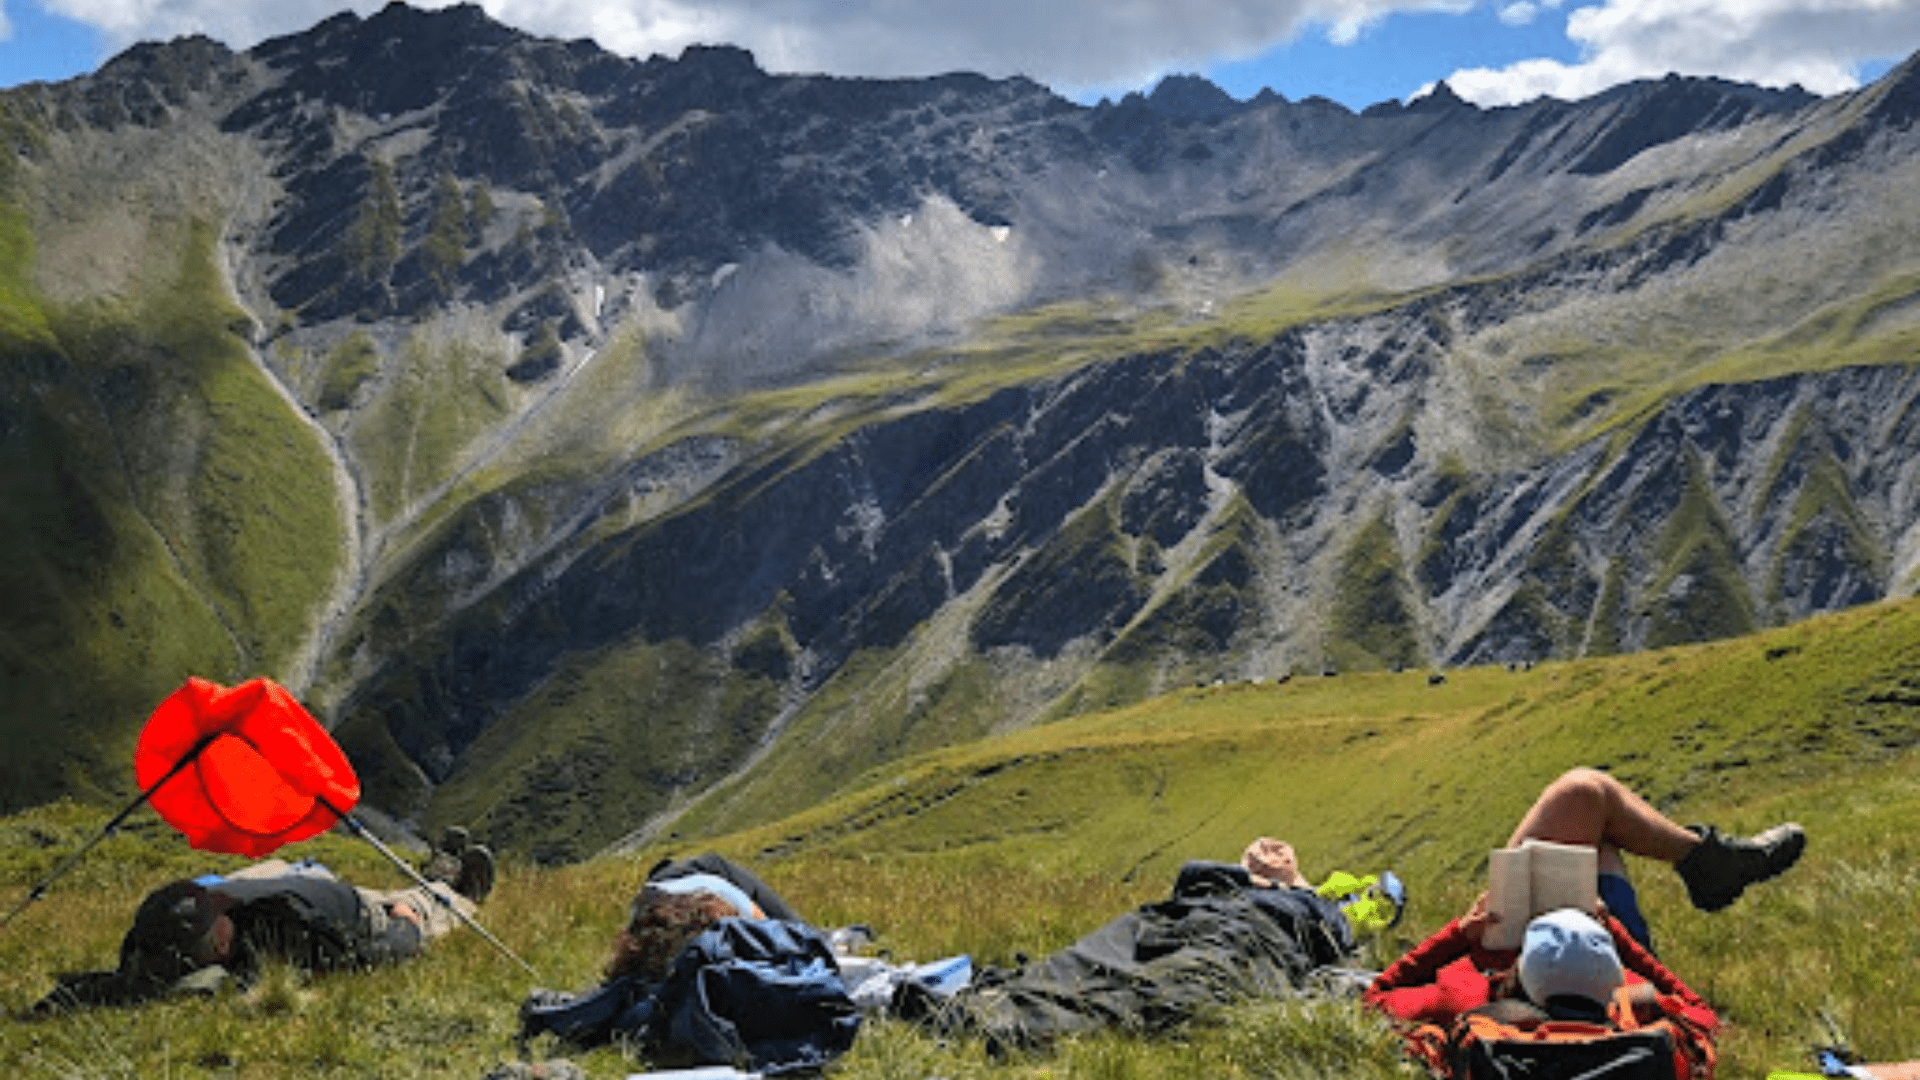 Afternoon nap in the Mountains of the Alps on the Tour du Mont Blanc